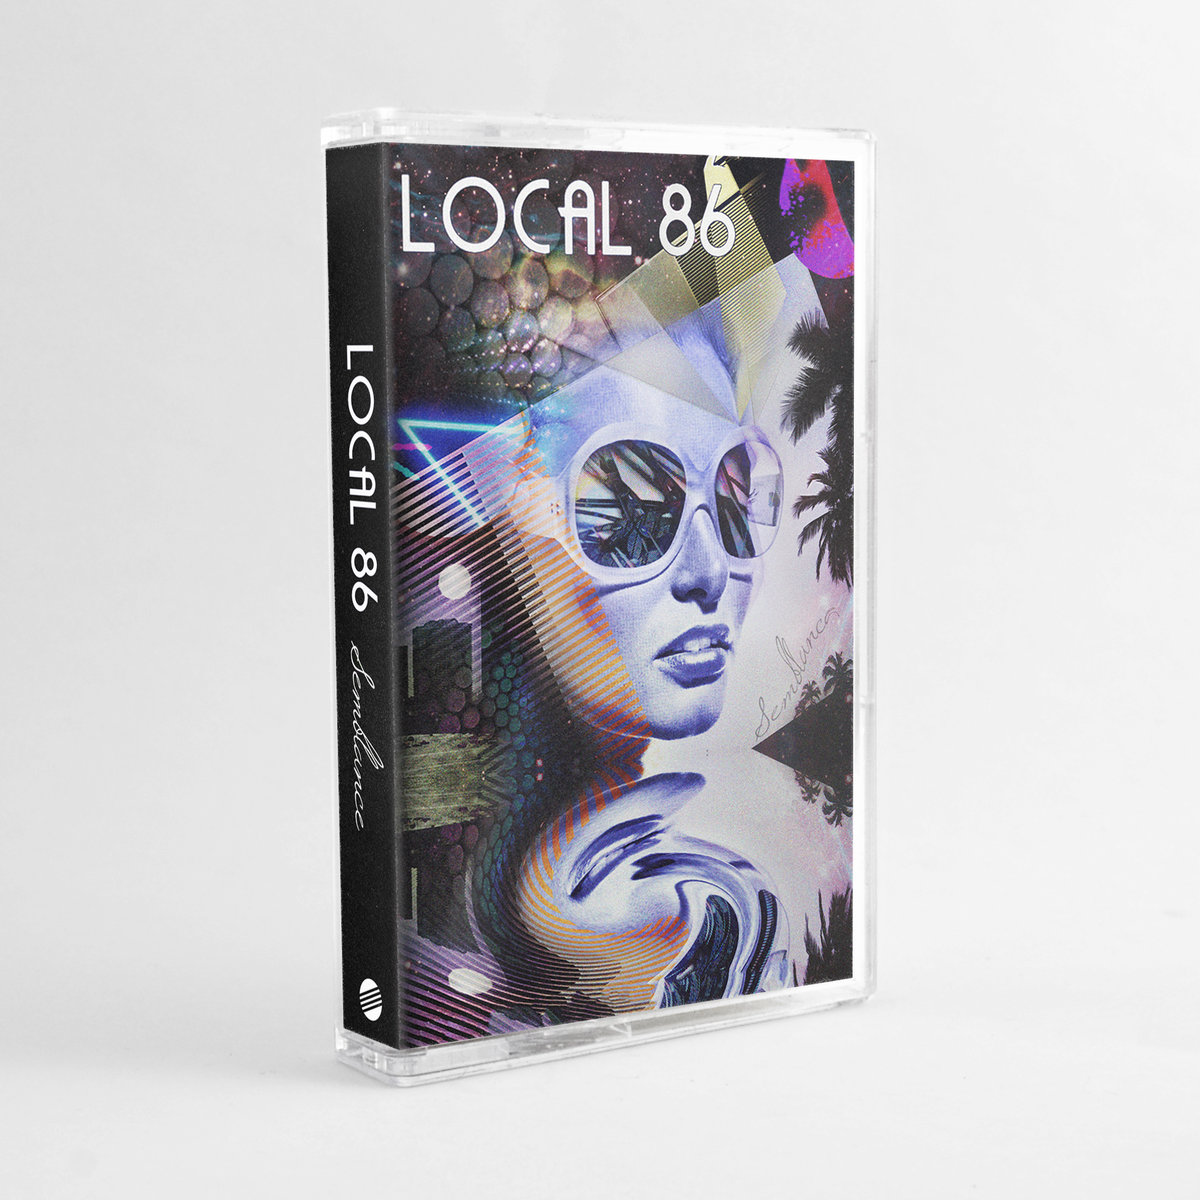 Semblance by Local 86